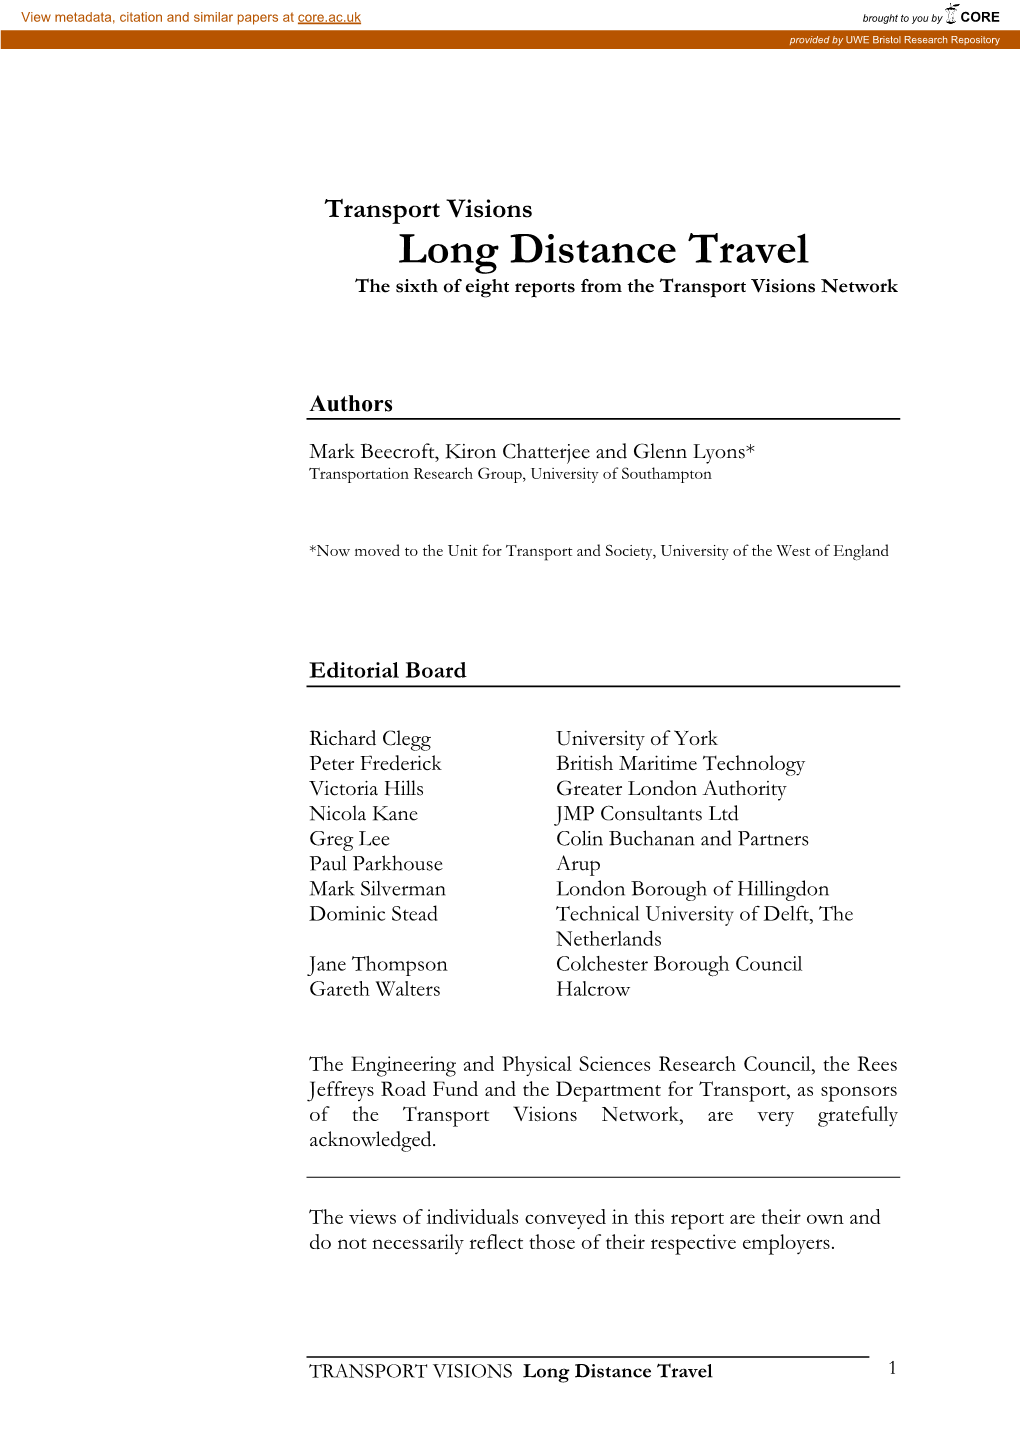 Long Distance Travel the Sixth of Eight Reports from the Transport Visions Network